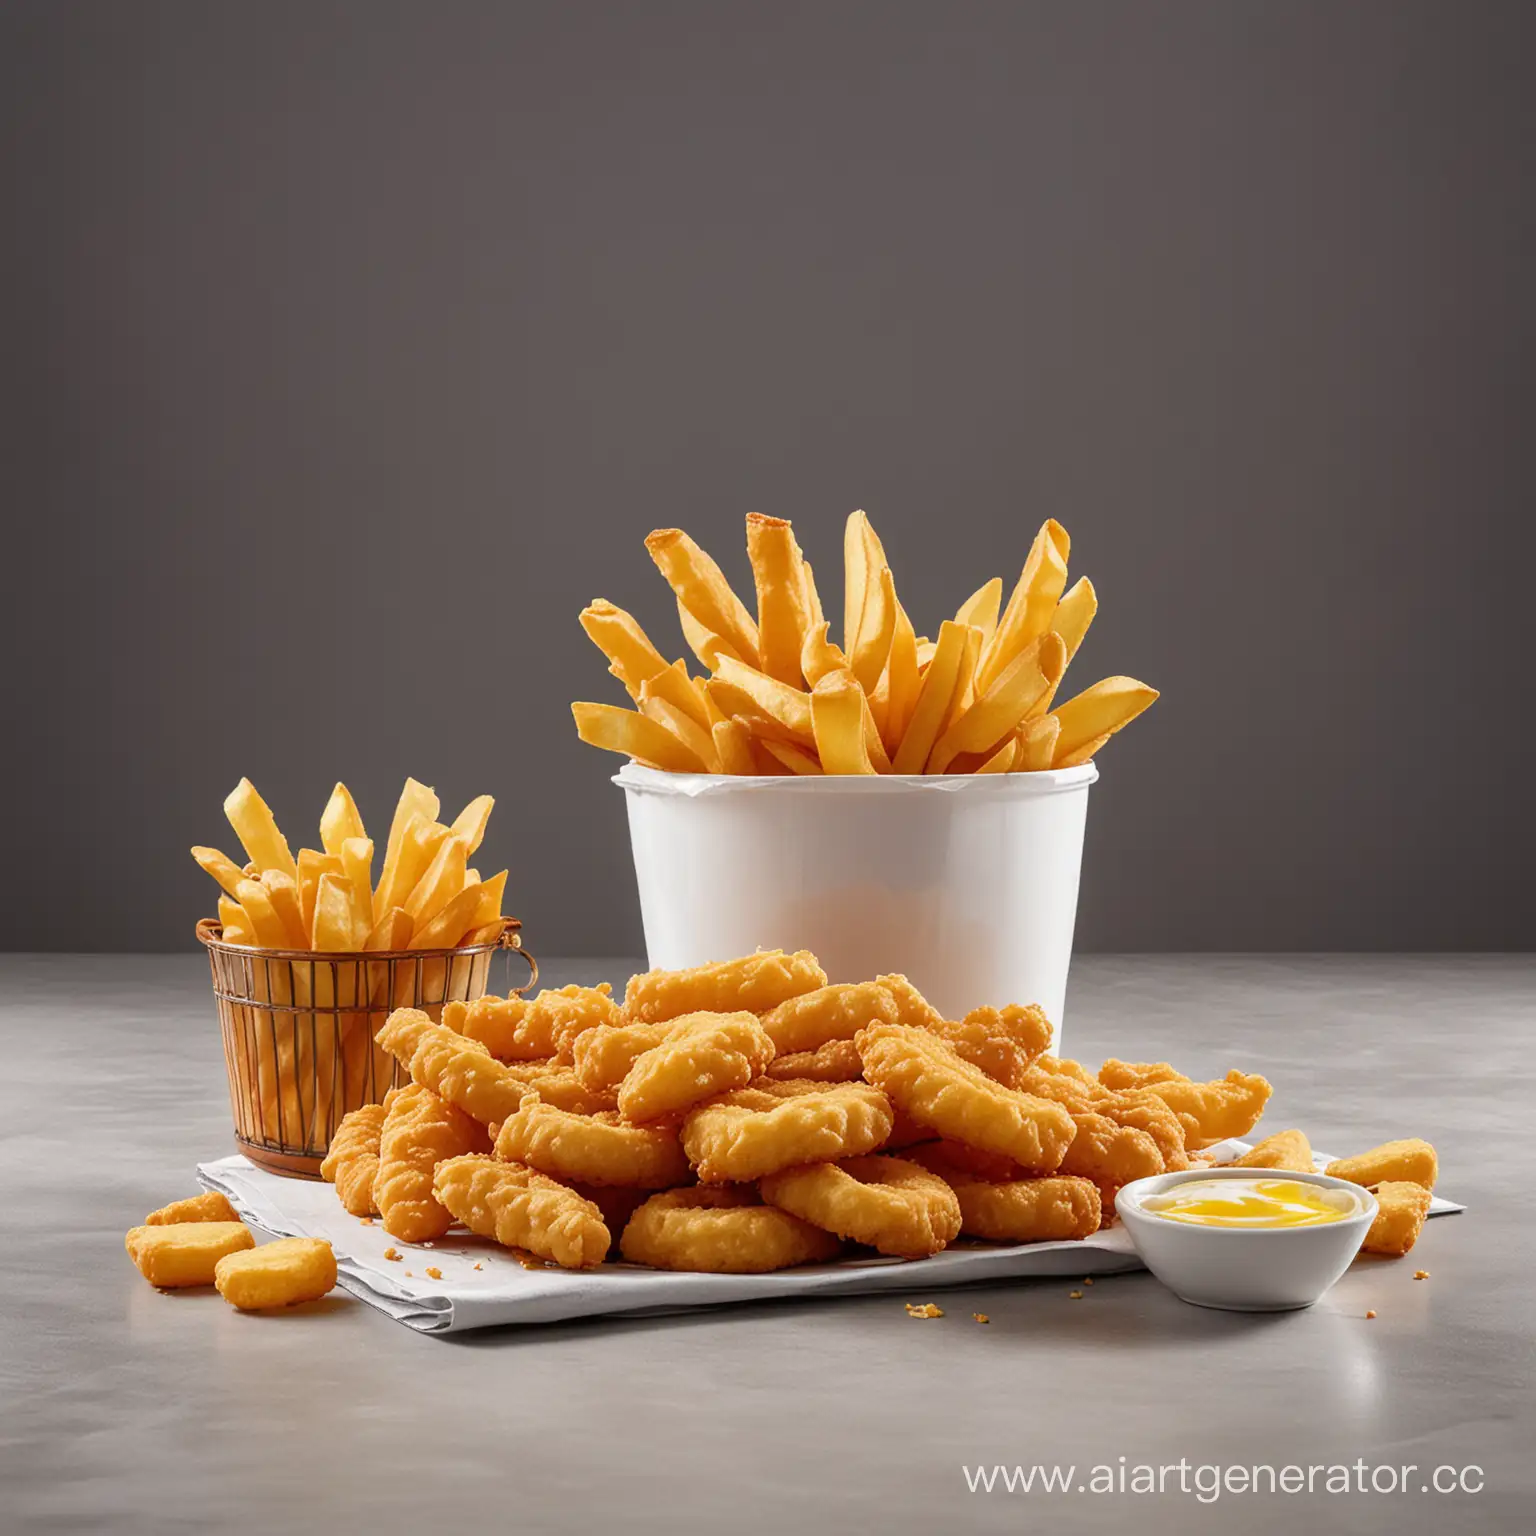 Crispy-Delights-5Liter-Fryer-Oil-Advertisement-with-Fries-Nuggets-and-Onion-Rings-on-a-Light-Background